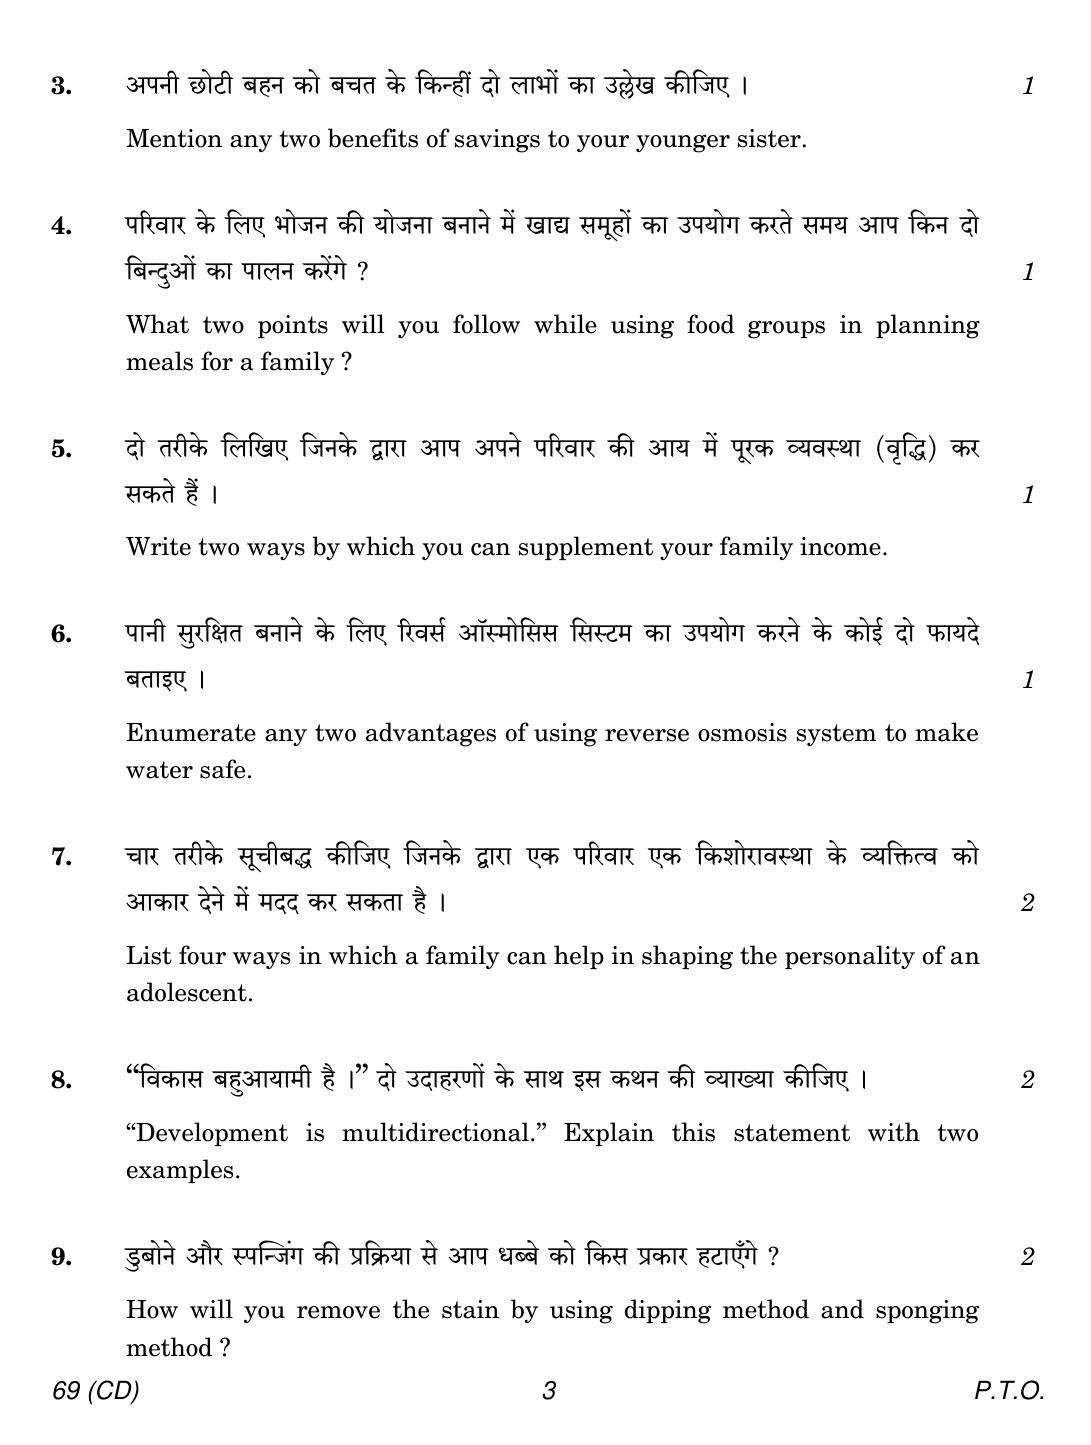 CBSE Class 12 69 HOME SCIENCE CD 2018 Question Paper - Page 3